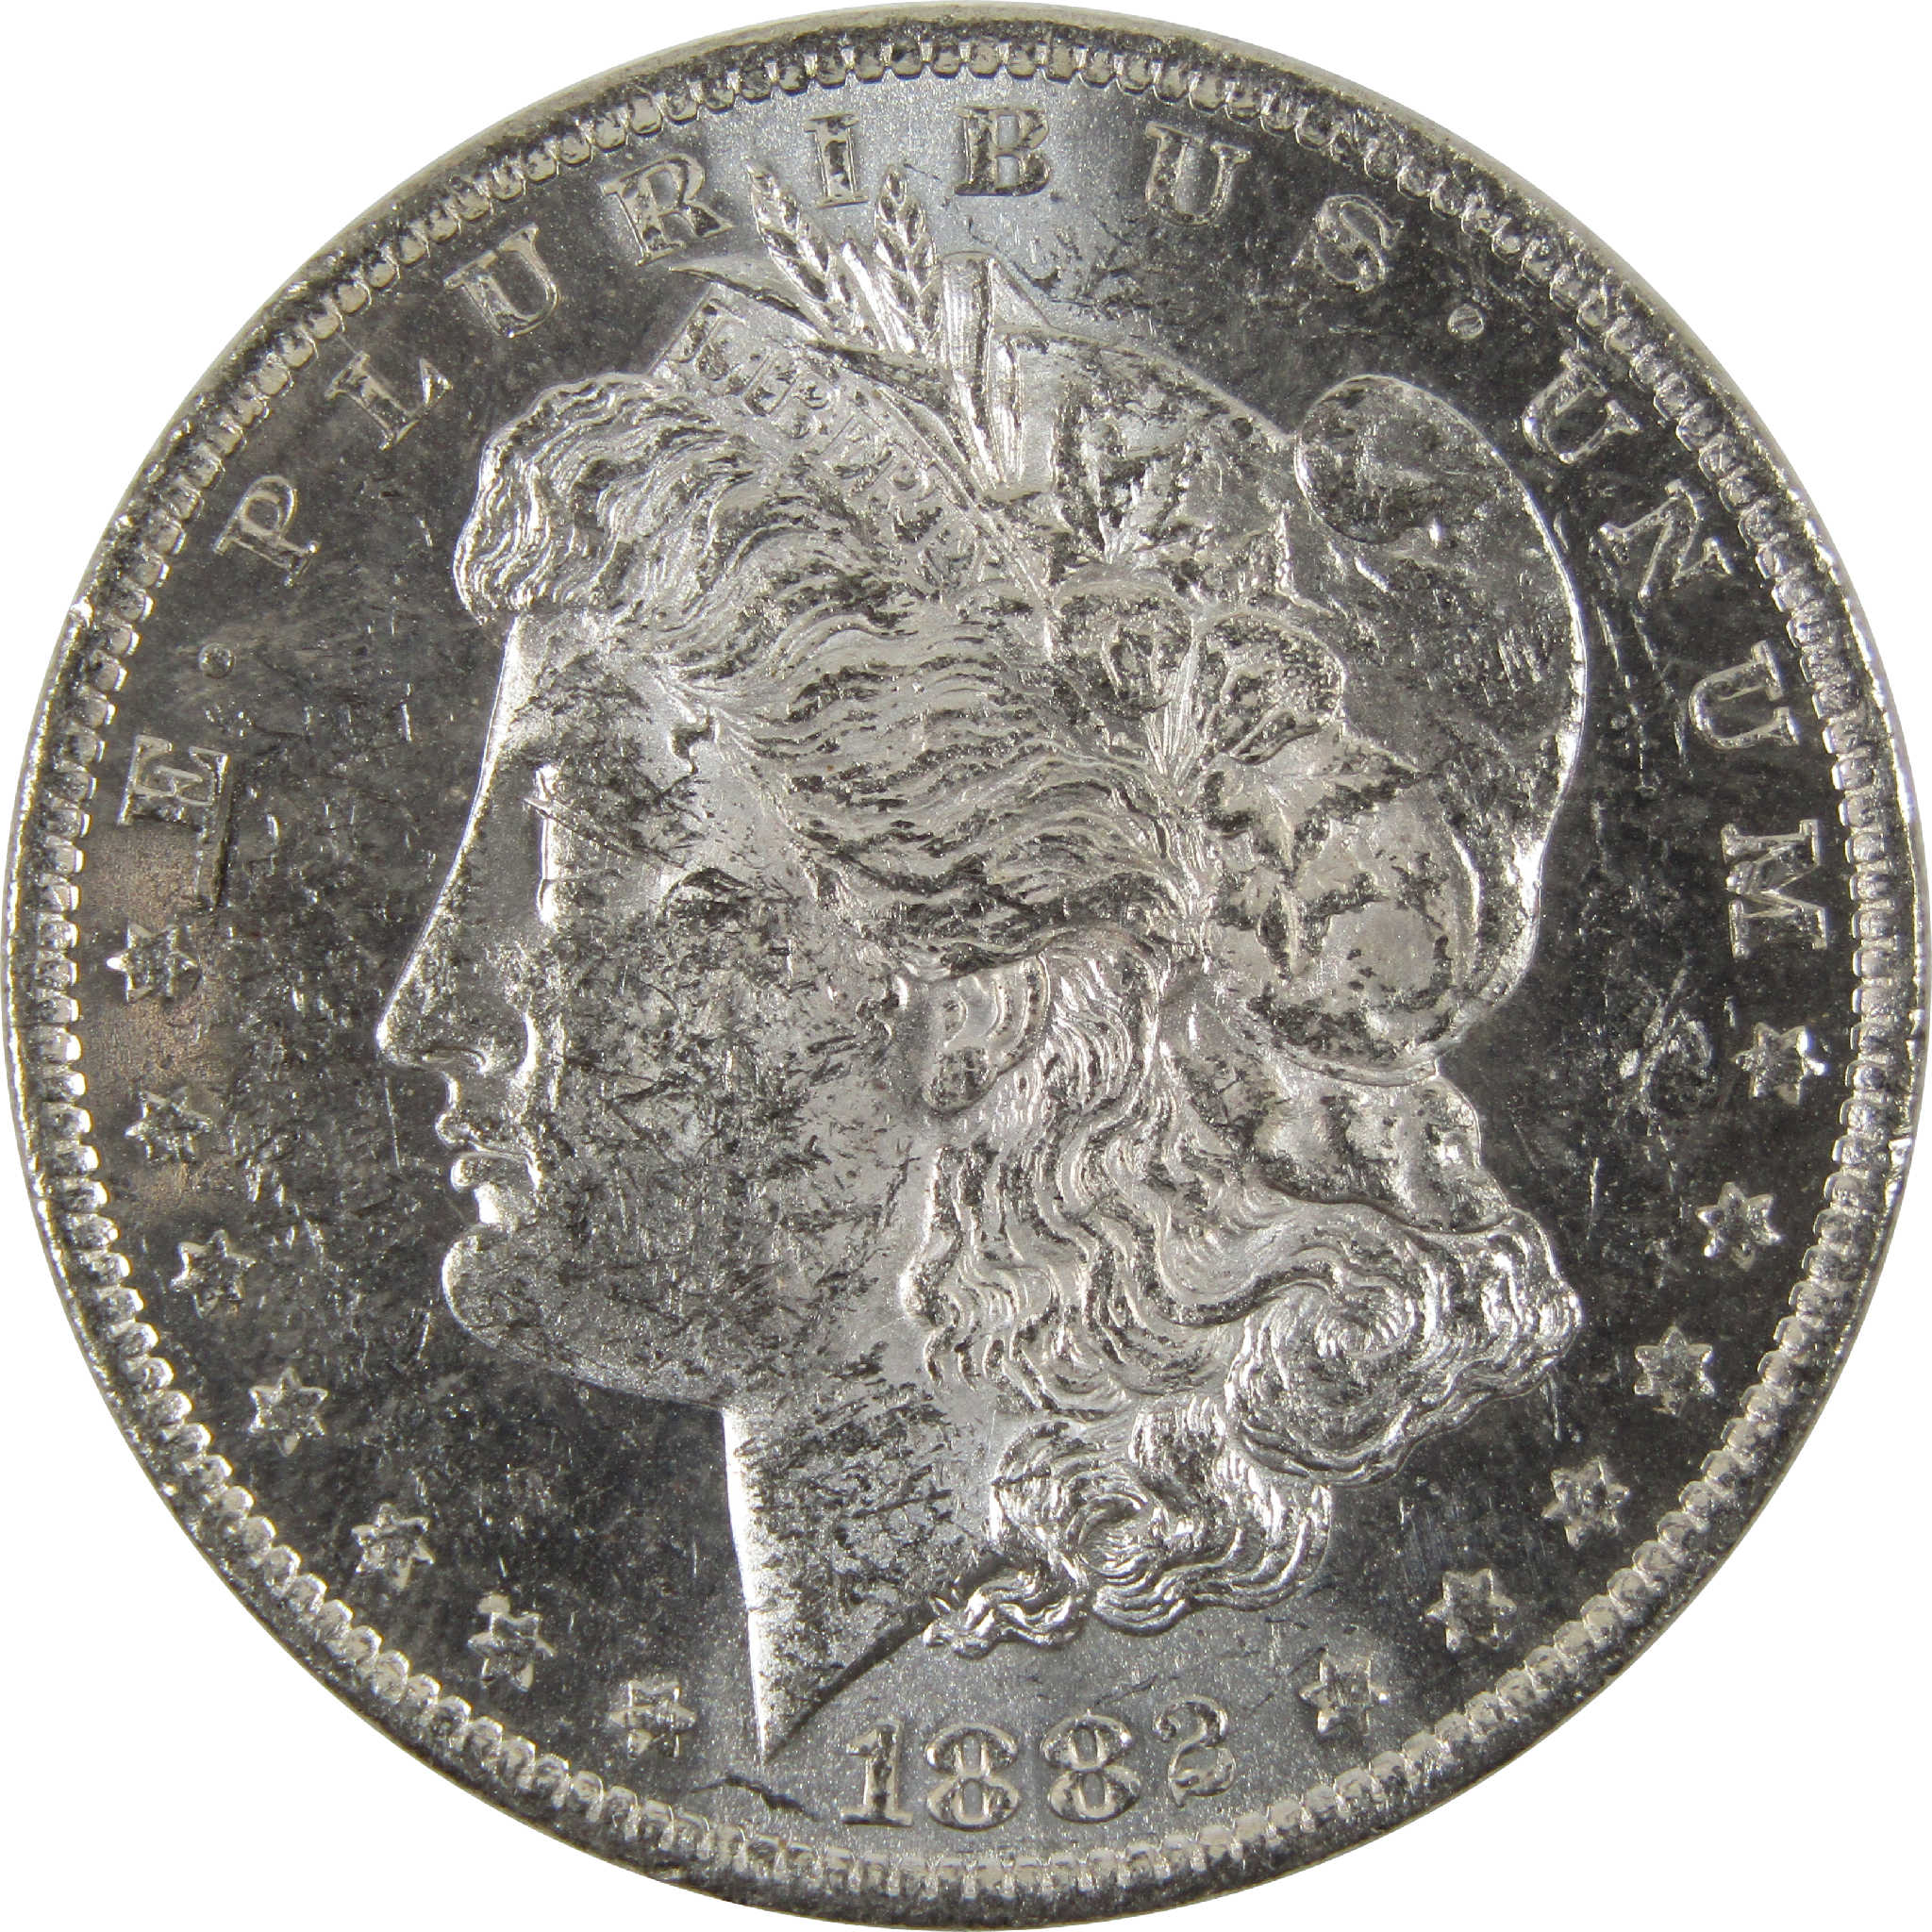 1882 O/O Morgan Dollar AU About Uncirculated 90% Silver $1 SKU:I8895 - Morgan coin - Morgan silver dollar - Morgan silver dollar for sale - Profile Coins &amp; Collectibles